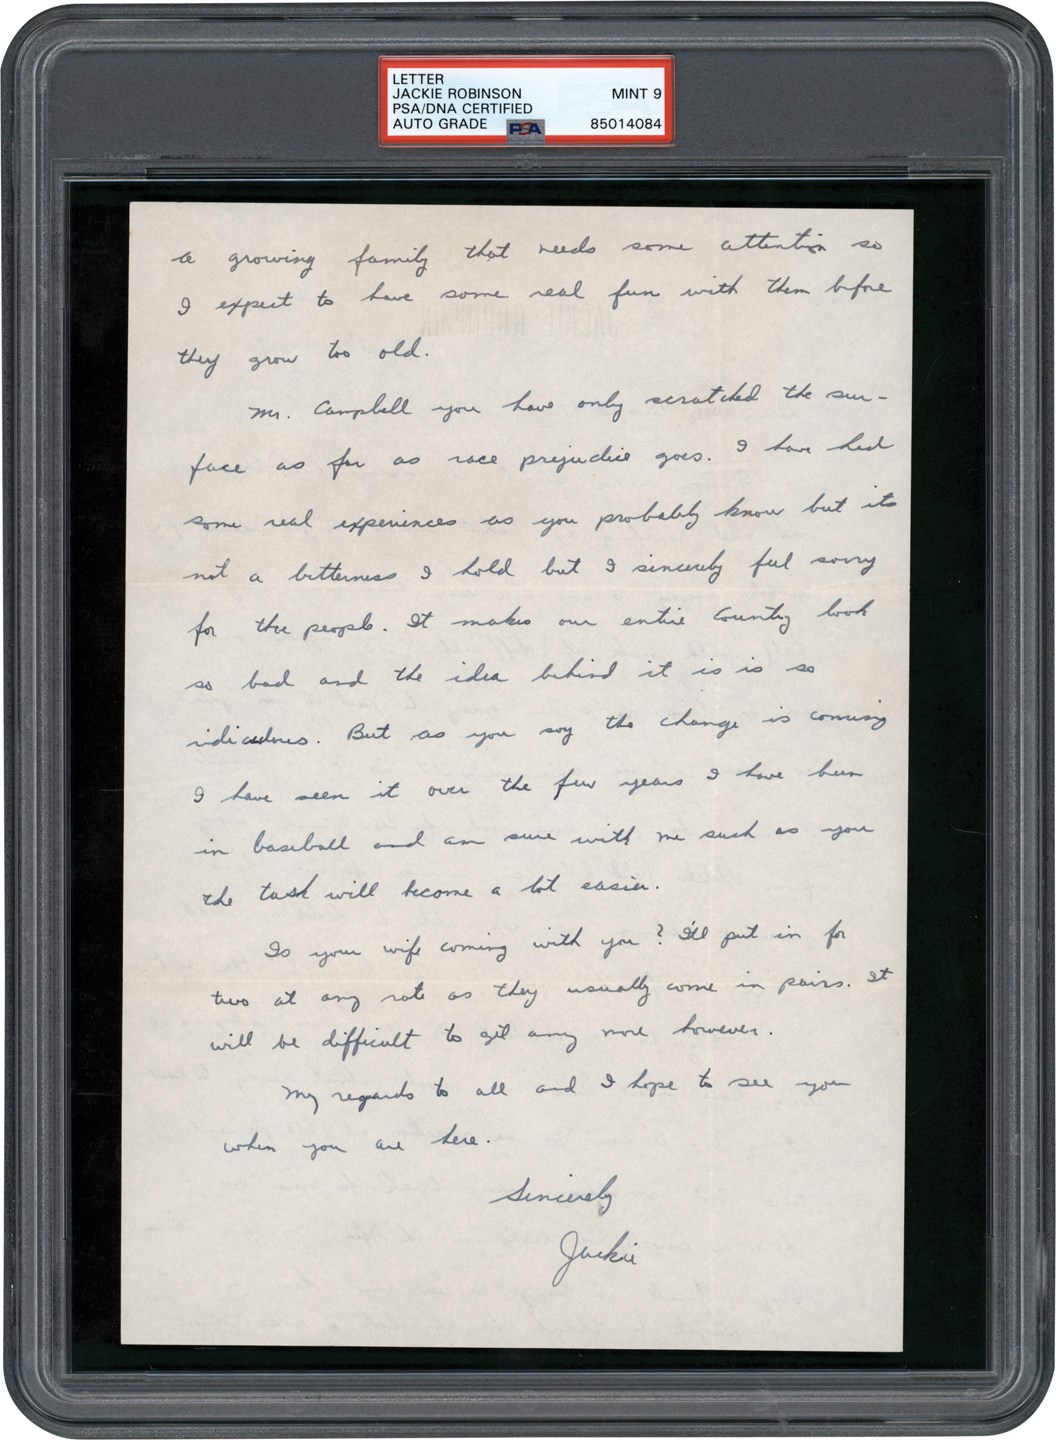 Circa 1956 Jackie Robinson Handwritten Letter with Racial Content - "It's Not a Bitterness I Hold but I Sincerely Feel Sorry for the People" (Who are Racially Prejudiced) (PSA MINT 9)